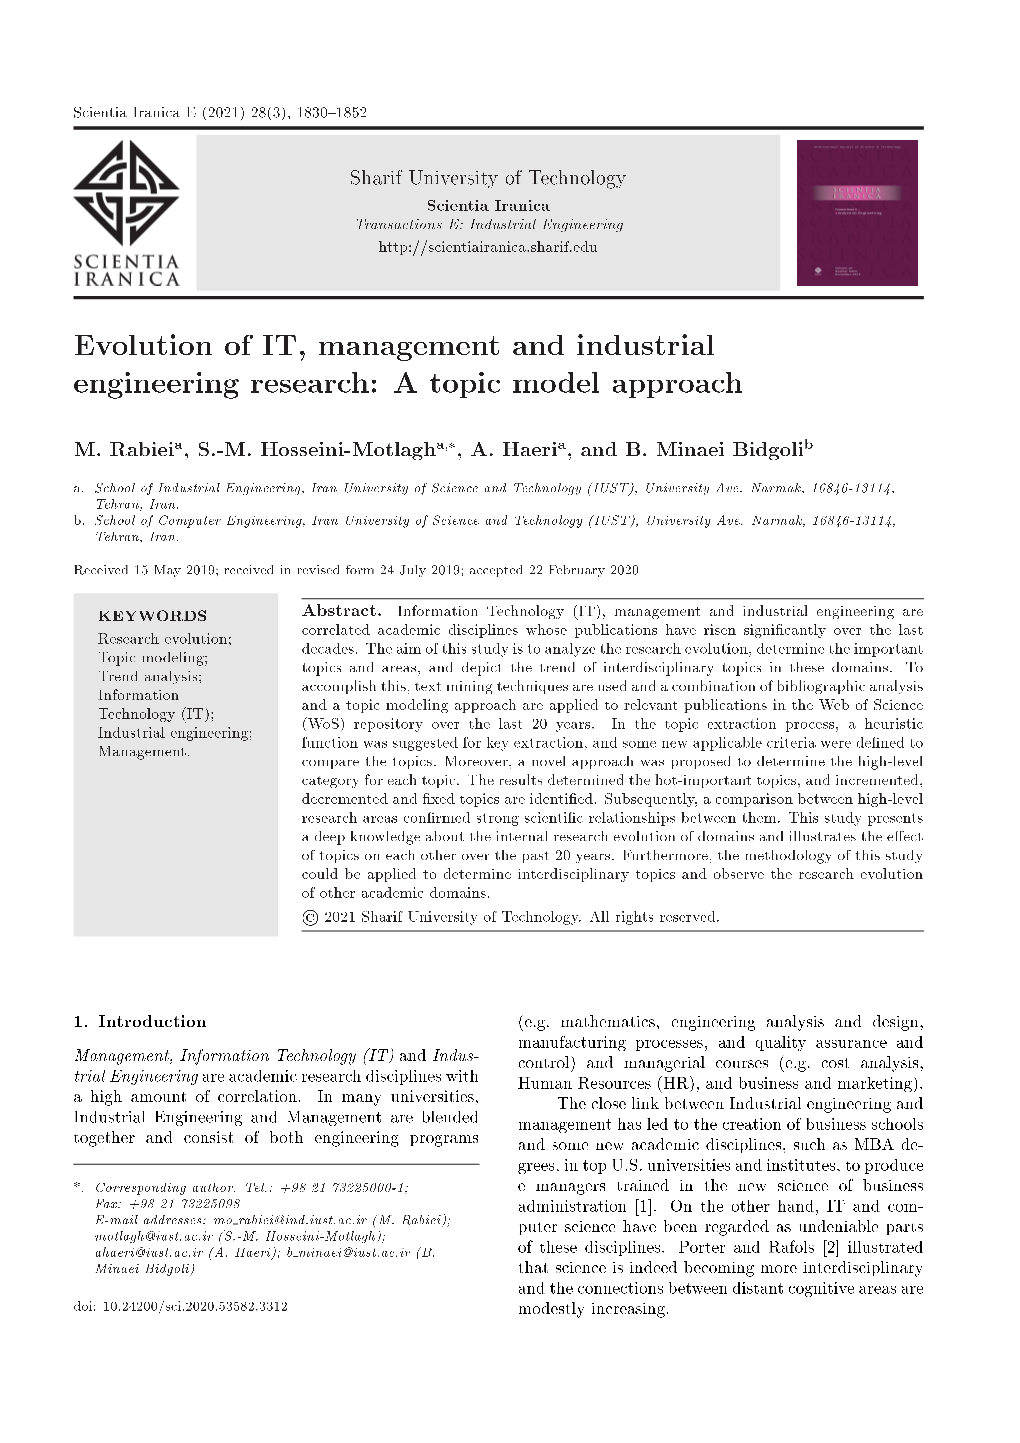 Evolution of IT, Management and Industrial Engineering Research: a Topic Model Approach